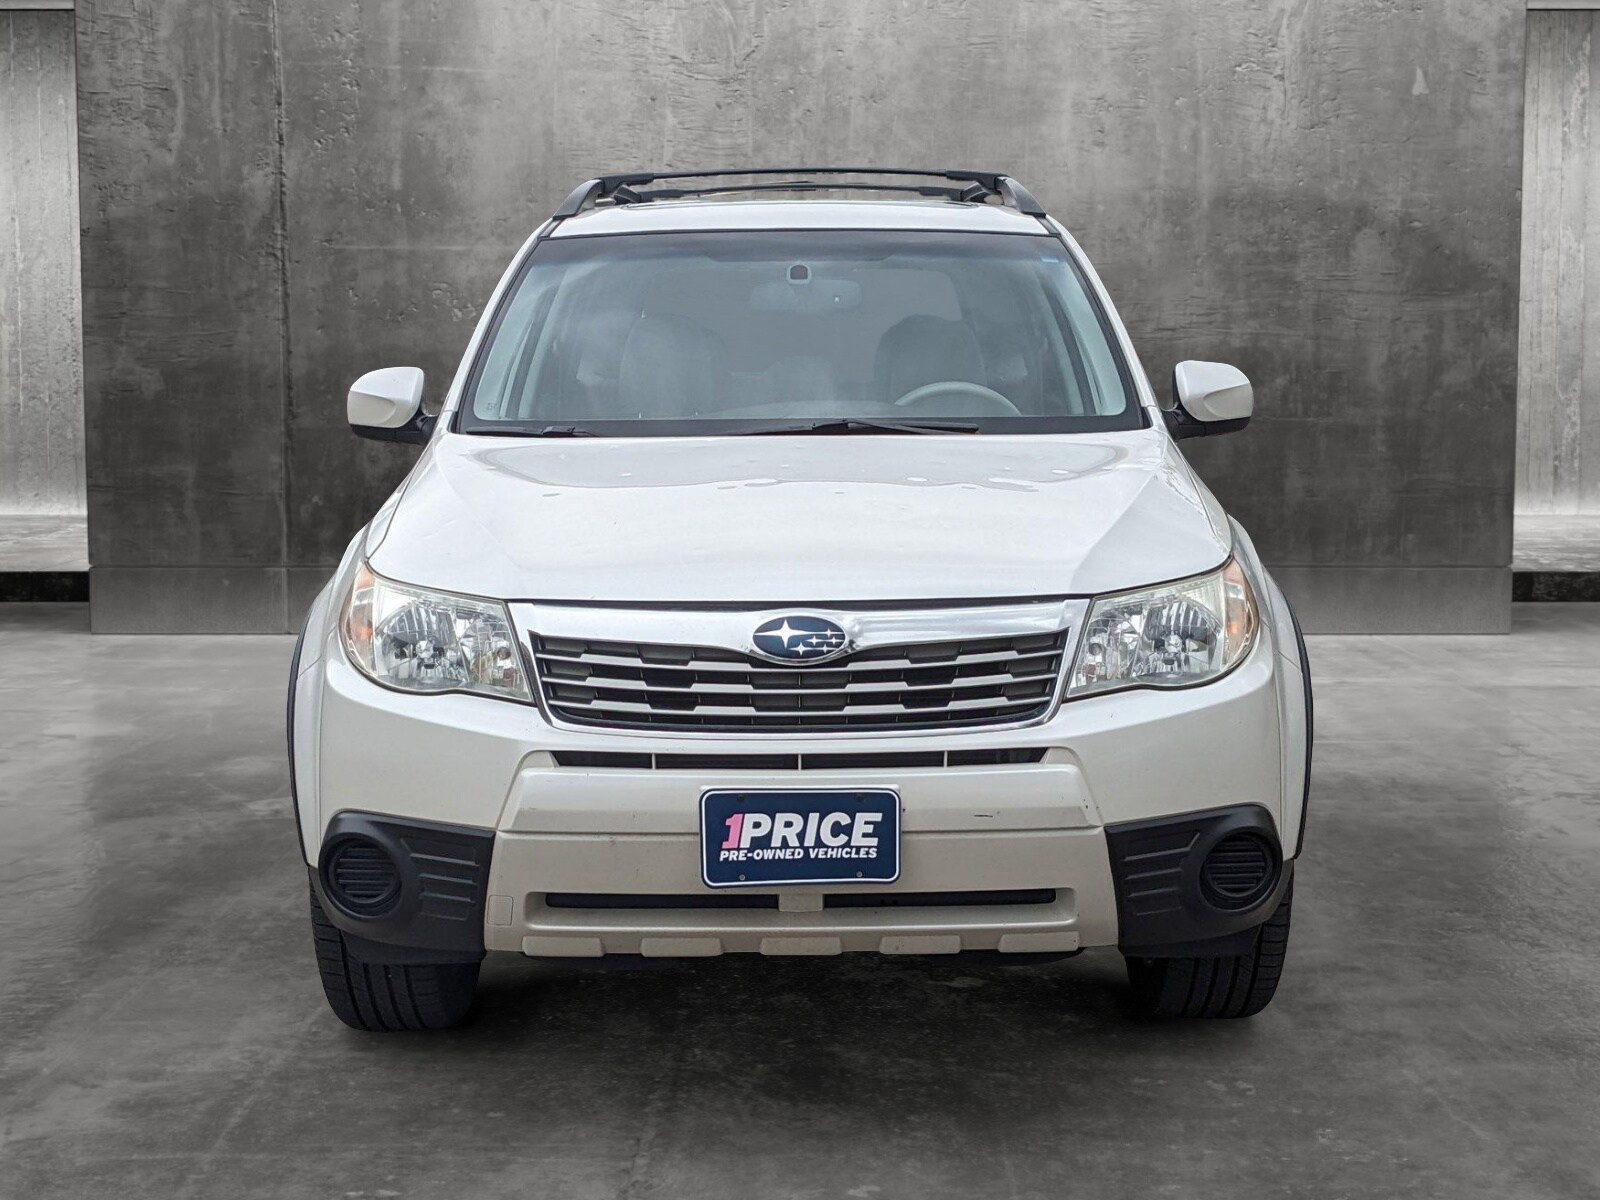 Used 2010 Subaru Forester X Premium Package with VIN JF2SH6CC0AH903439 for sale in Golden, CO